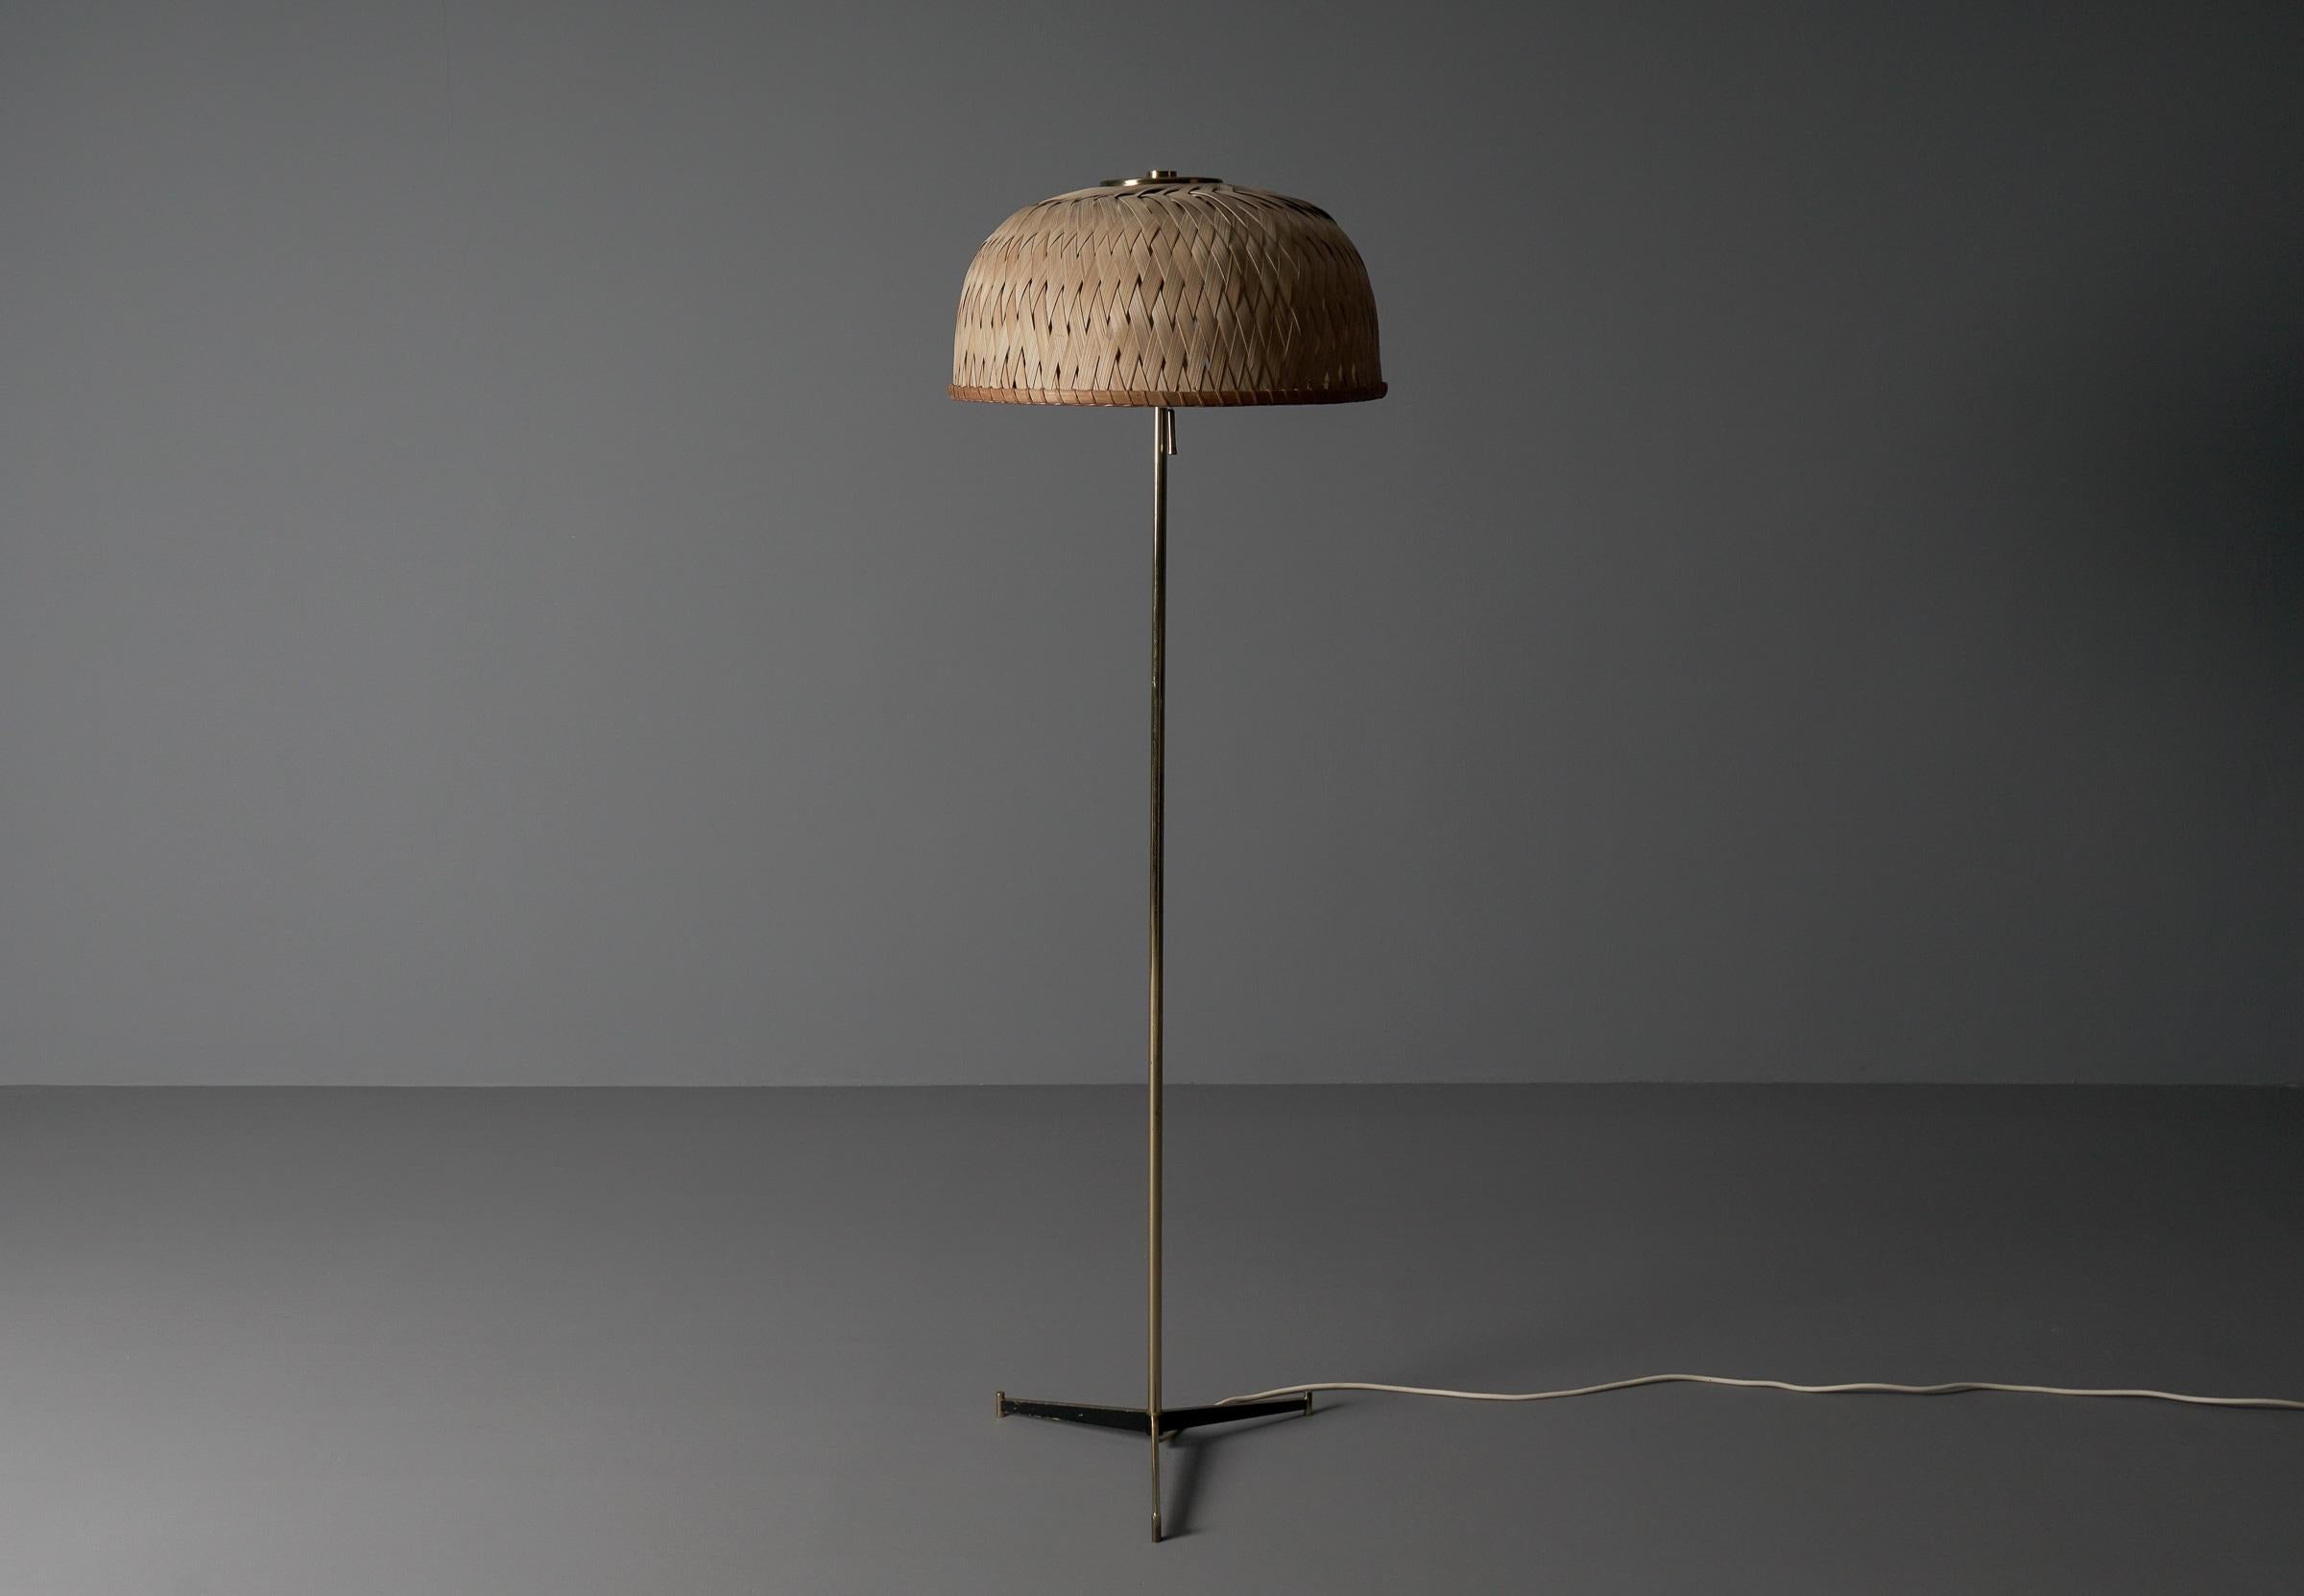 Italian Tripod Floor Lamp in Brass and Wicker Shade, 1950s Italy For Sale